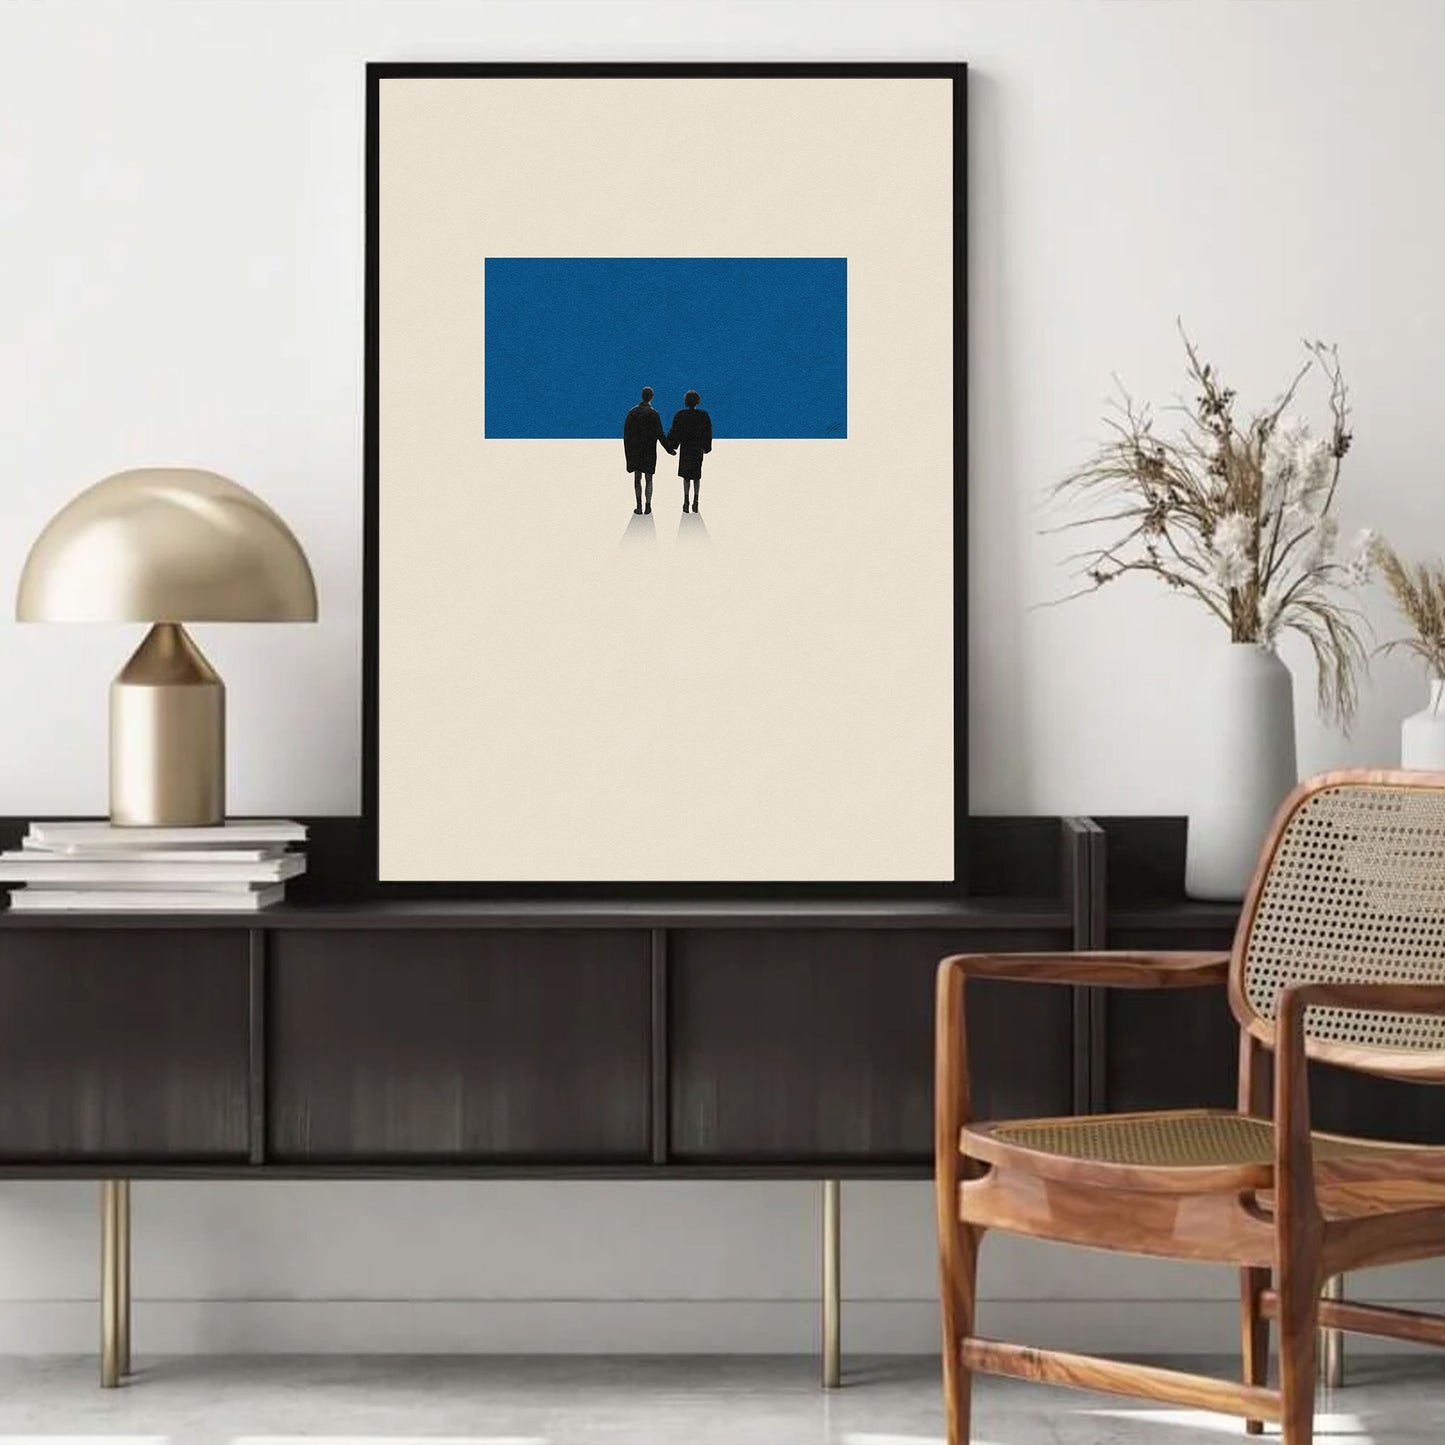 A minimalistic movie-inspired framed poster featuring the last scene of the movie Fight Club 